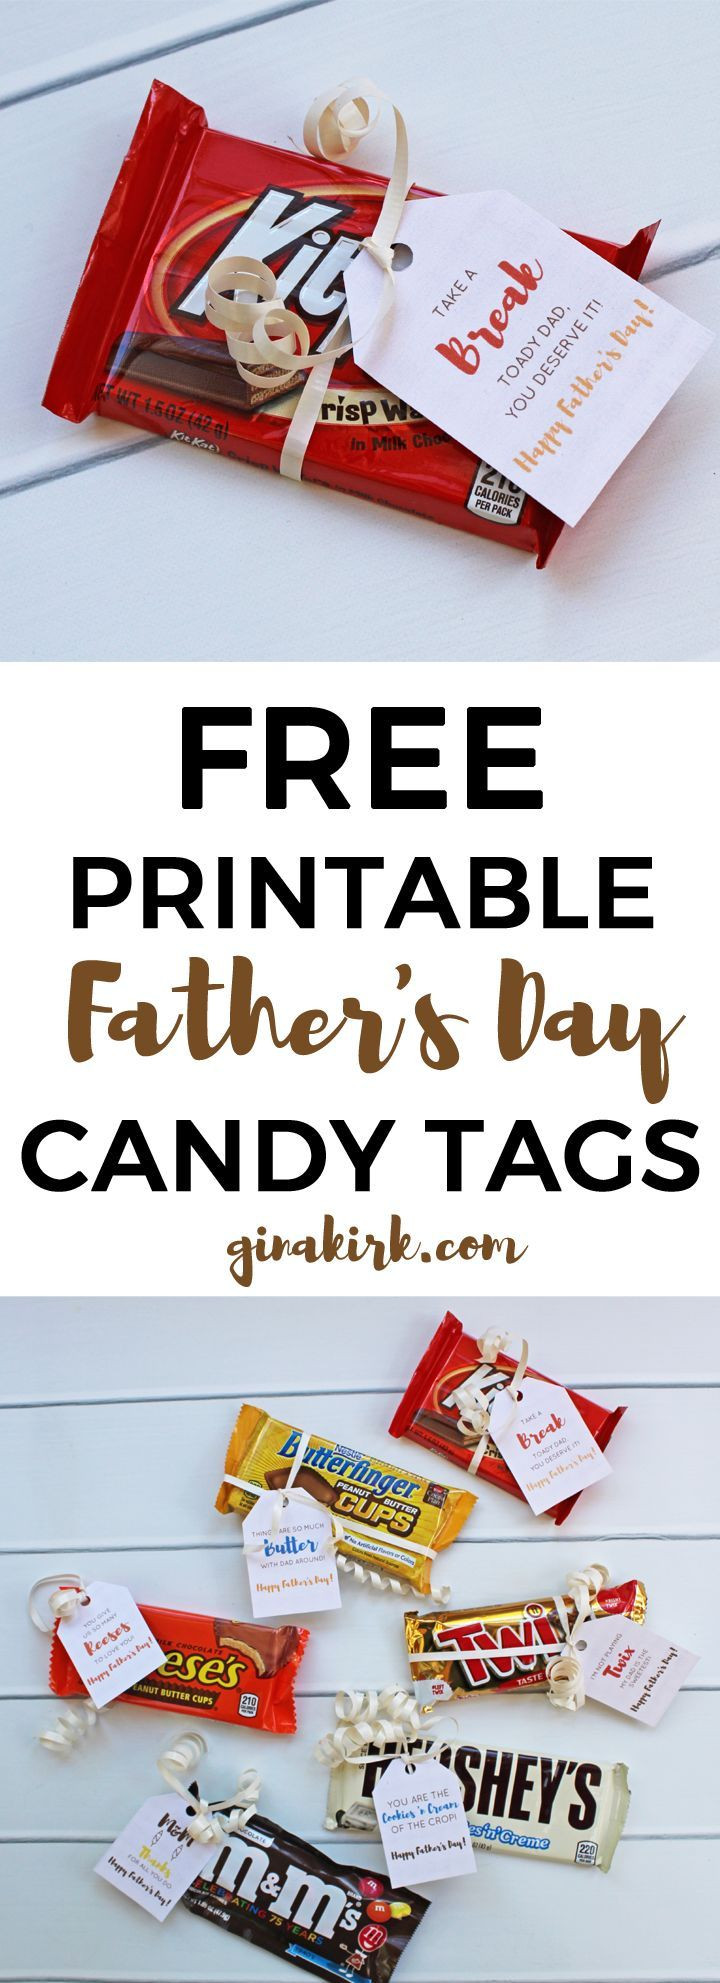 Free Fathers Day Gift Ideas
 347 best images about Father s Day Gift Ideas on Pinterest